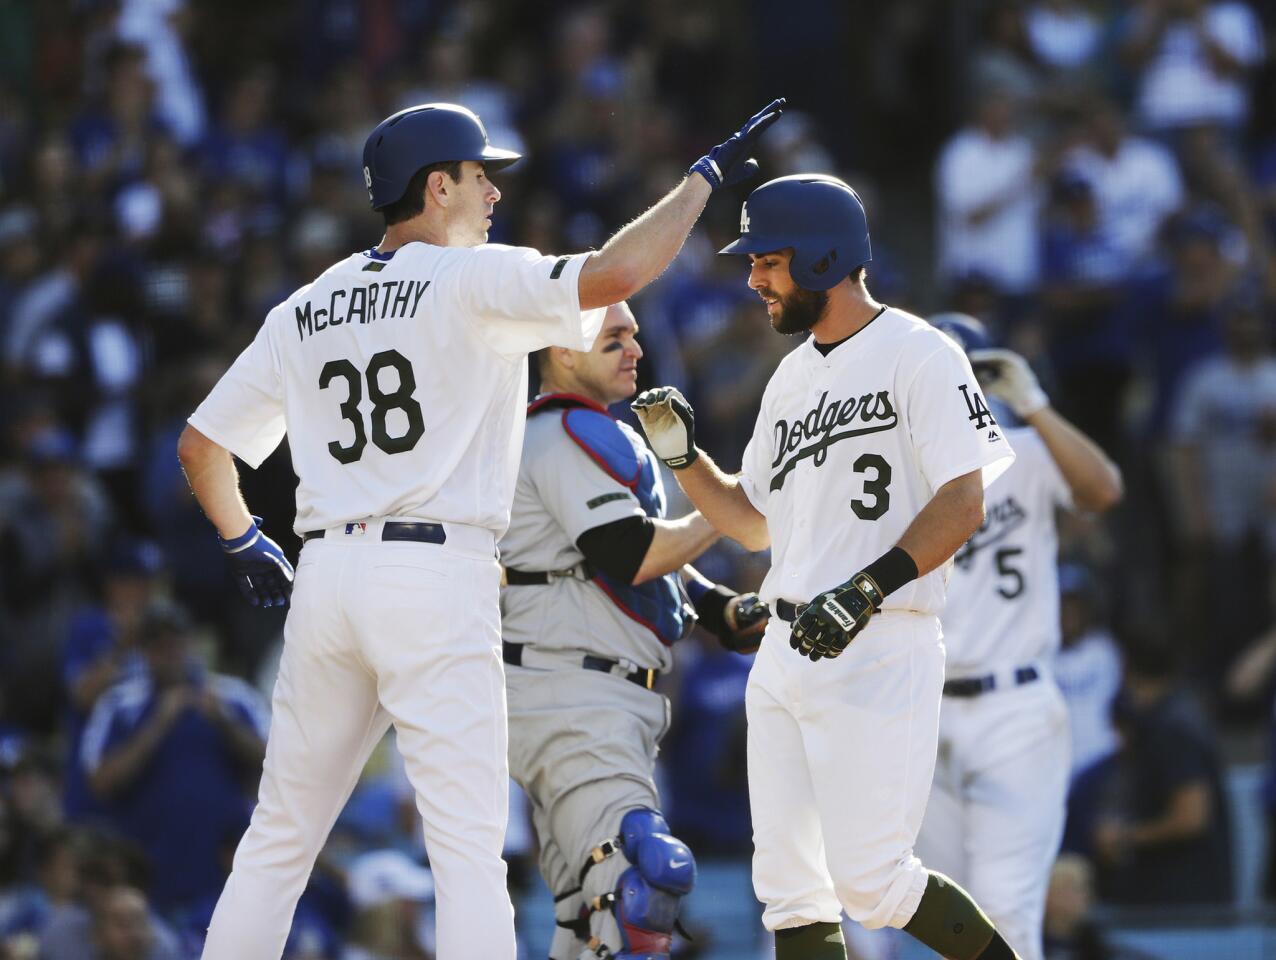 Dodgers center fielder Chris Taylor (3) gets a slap on the helmet from starting pitcher Brandon McCarthy (38) after hitting a home run against the Cubs during the fifth inning.